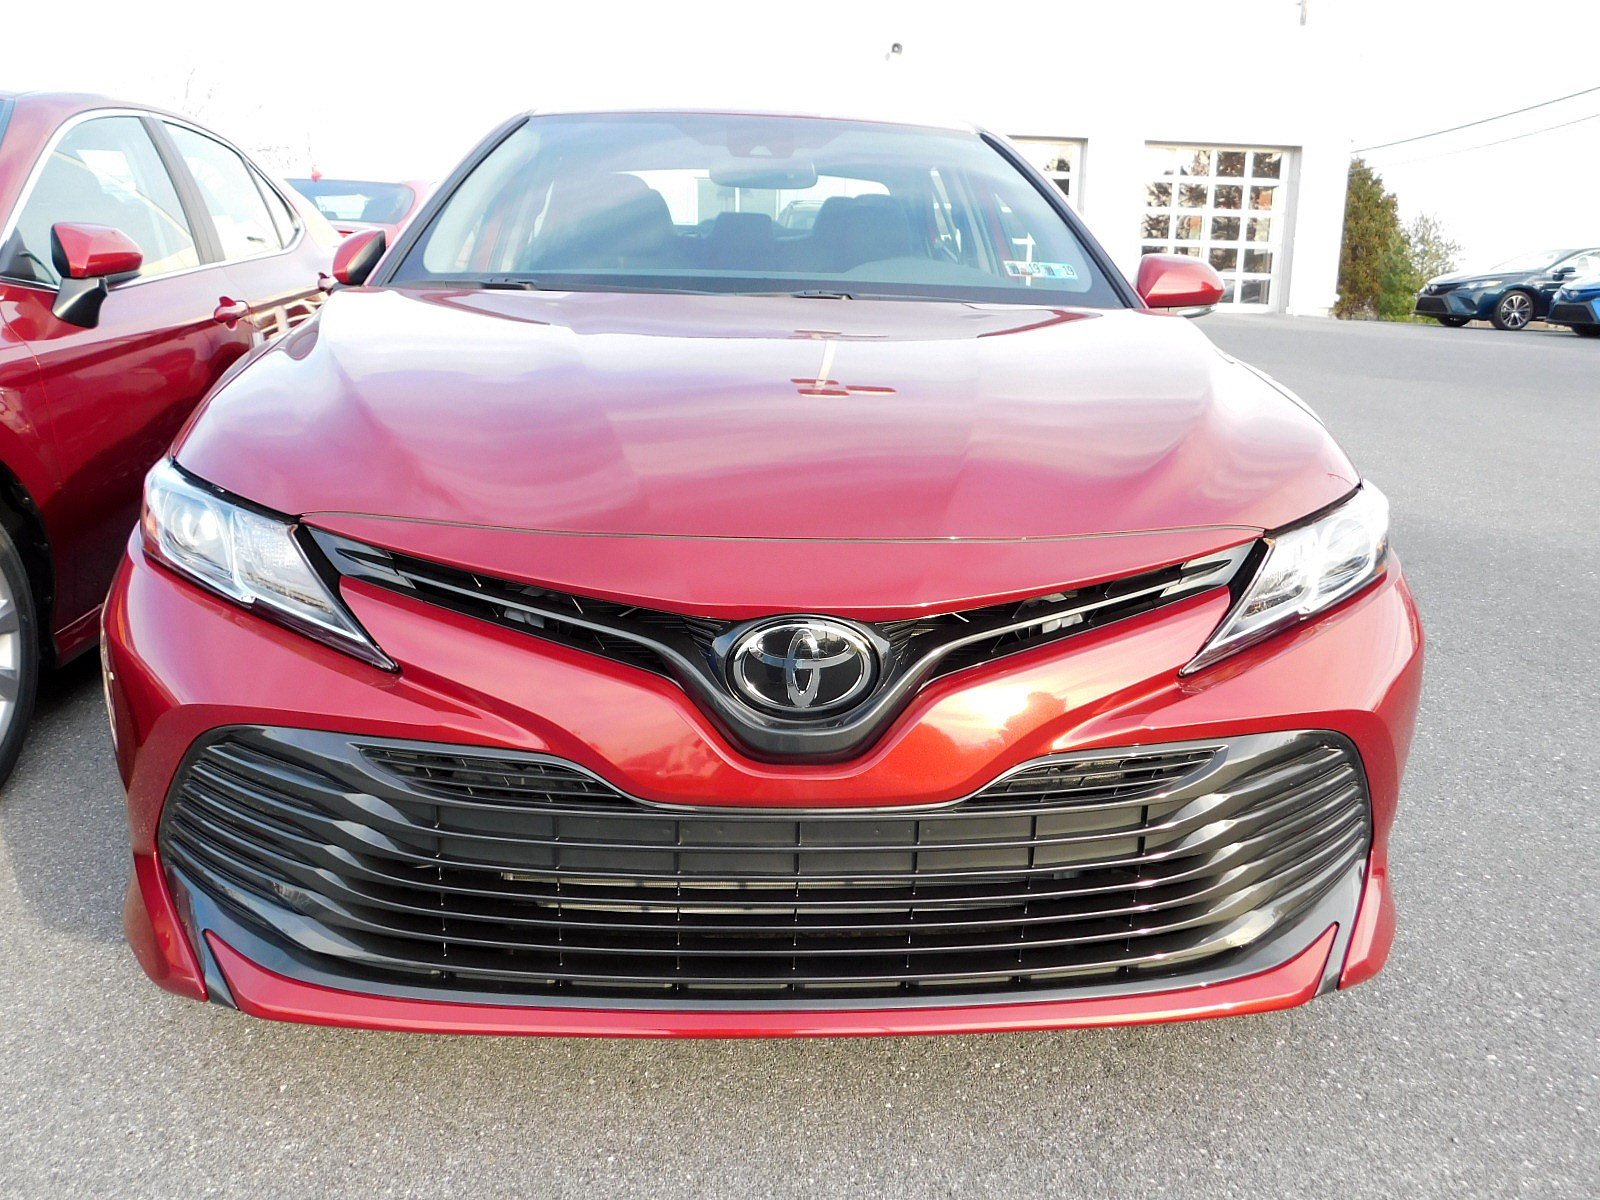 New 2019 Toyota Camry Le 4dr Car In East Petersburg 11389 Lancaster